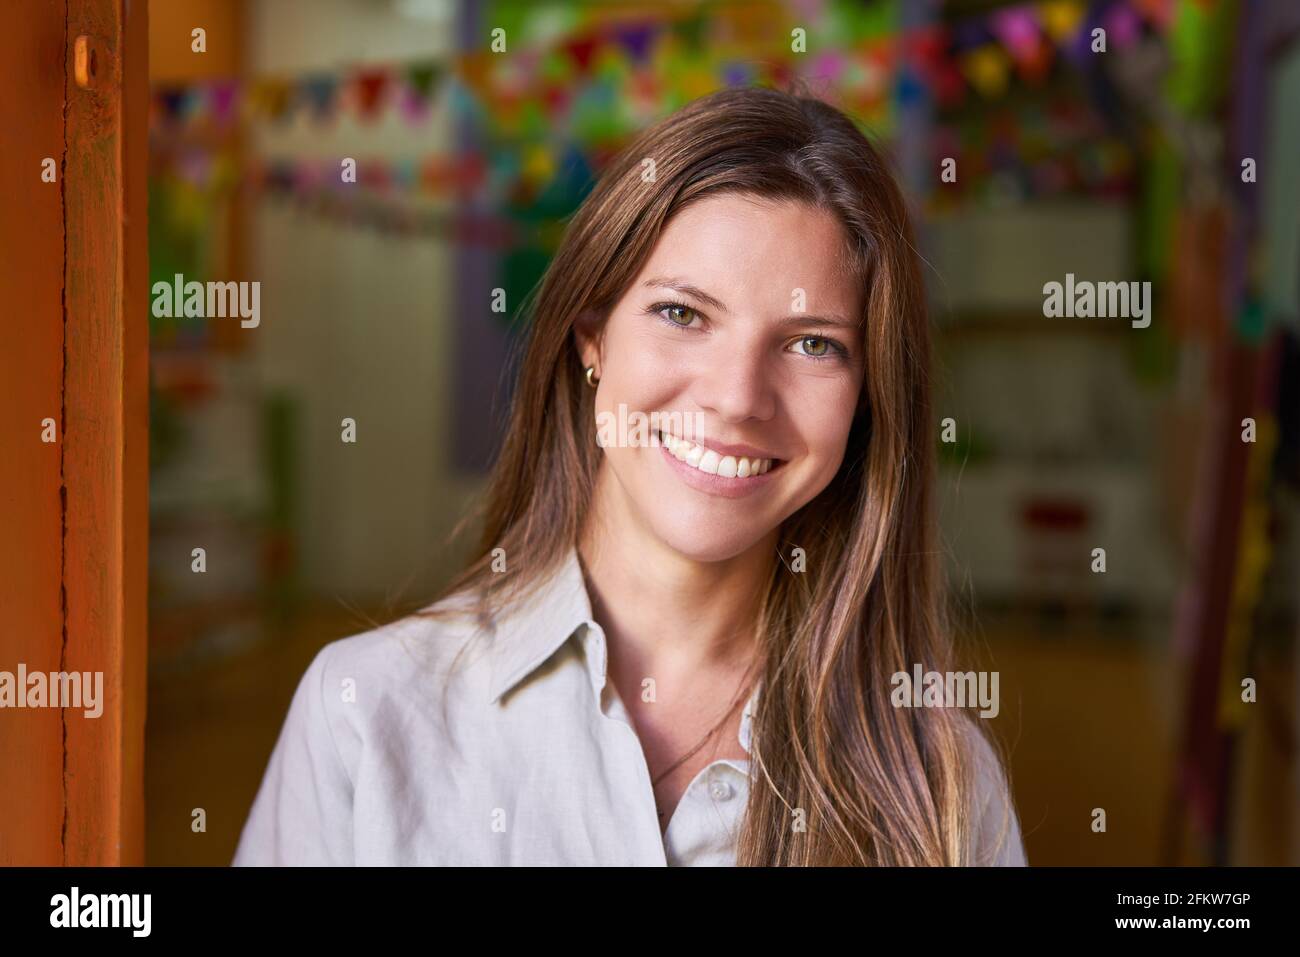 Happy young woman as a kindergarten teacher in a daycare center or school Stock Photo